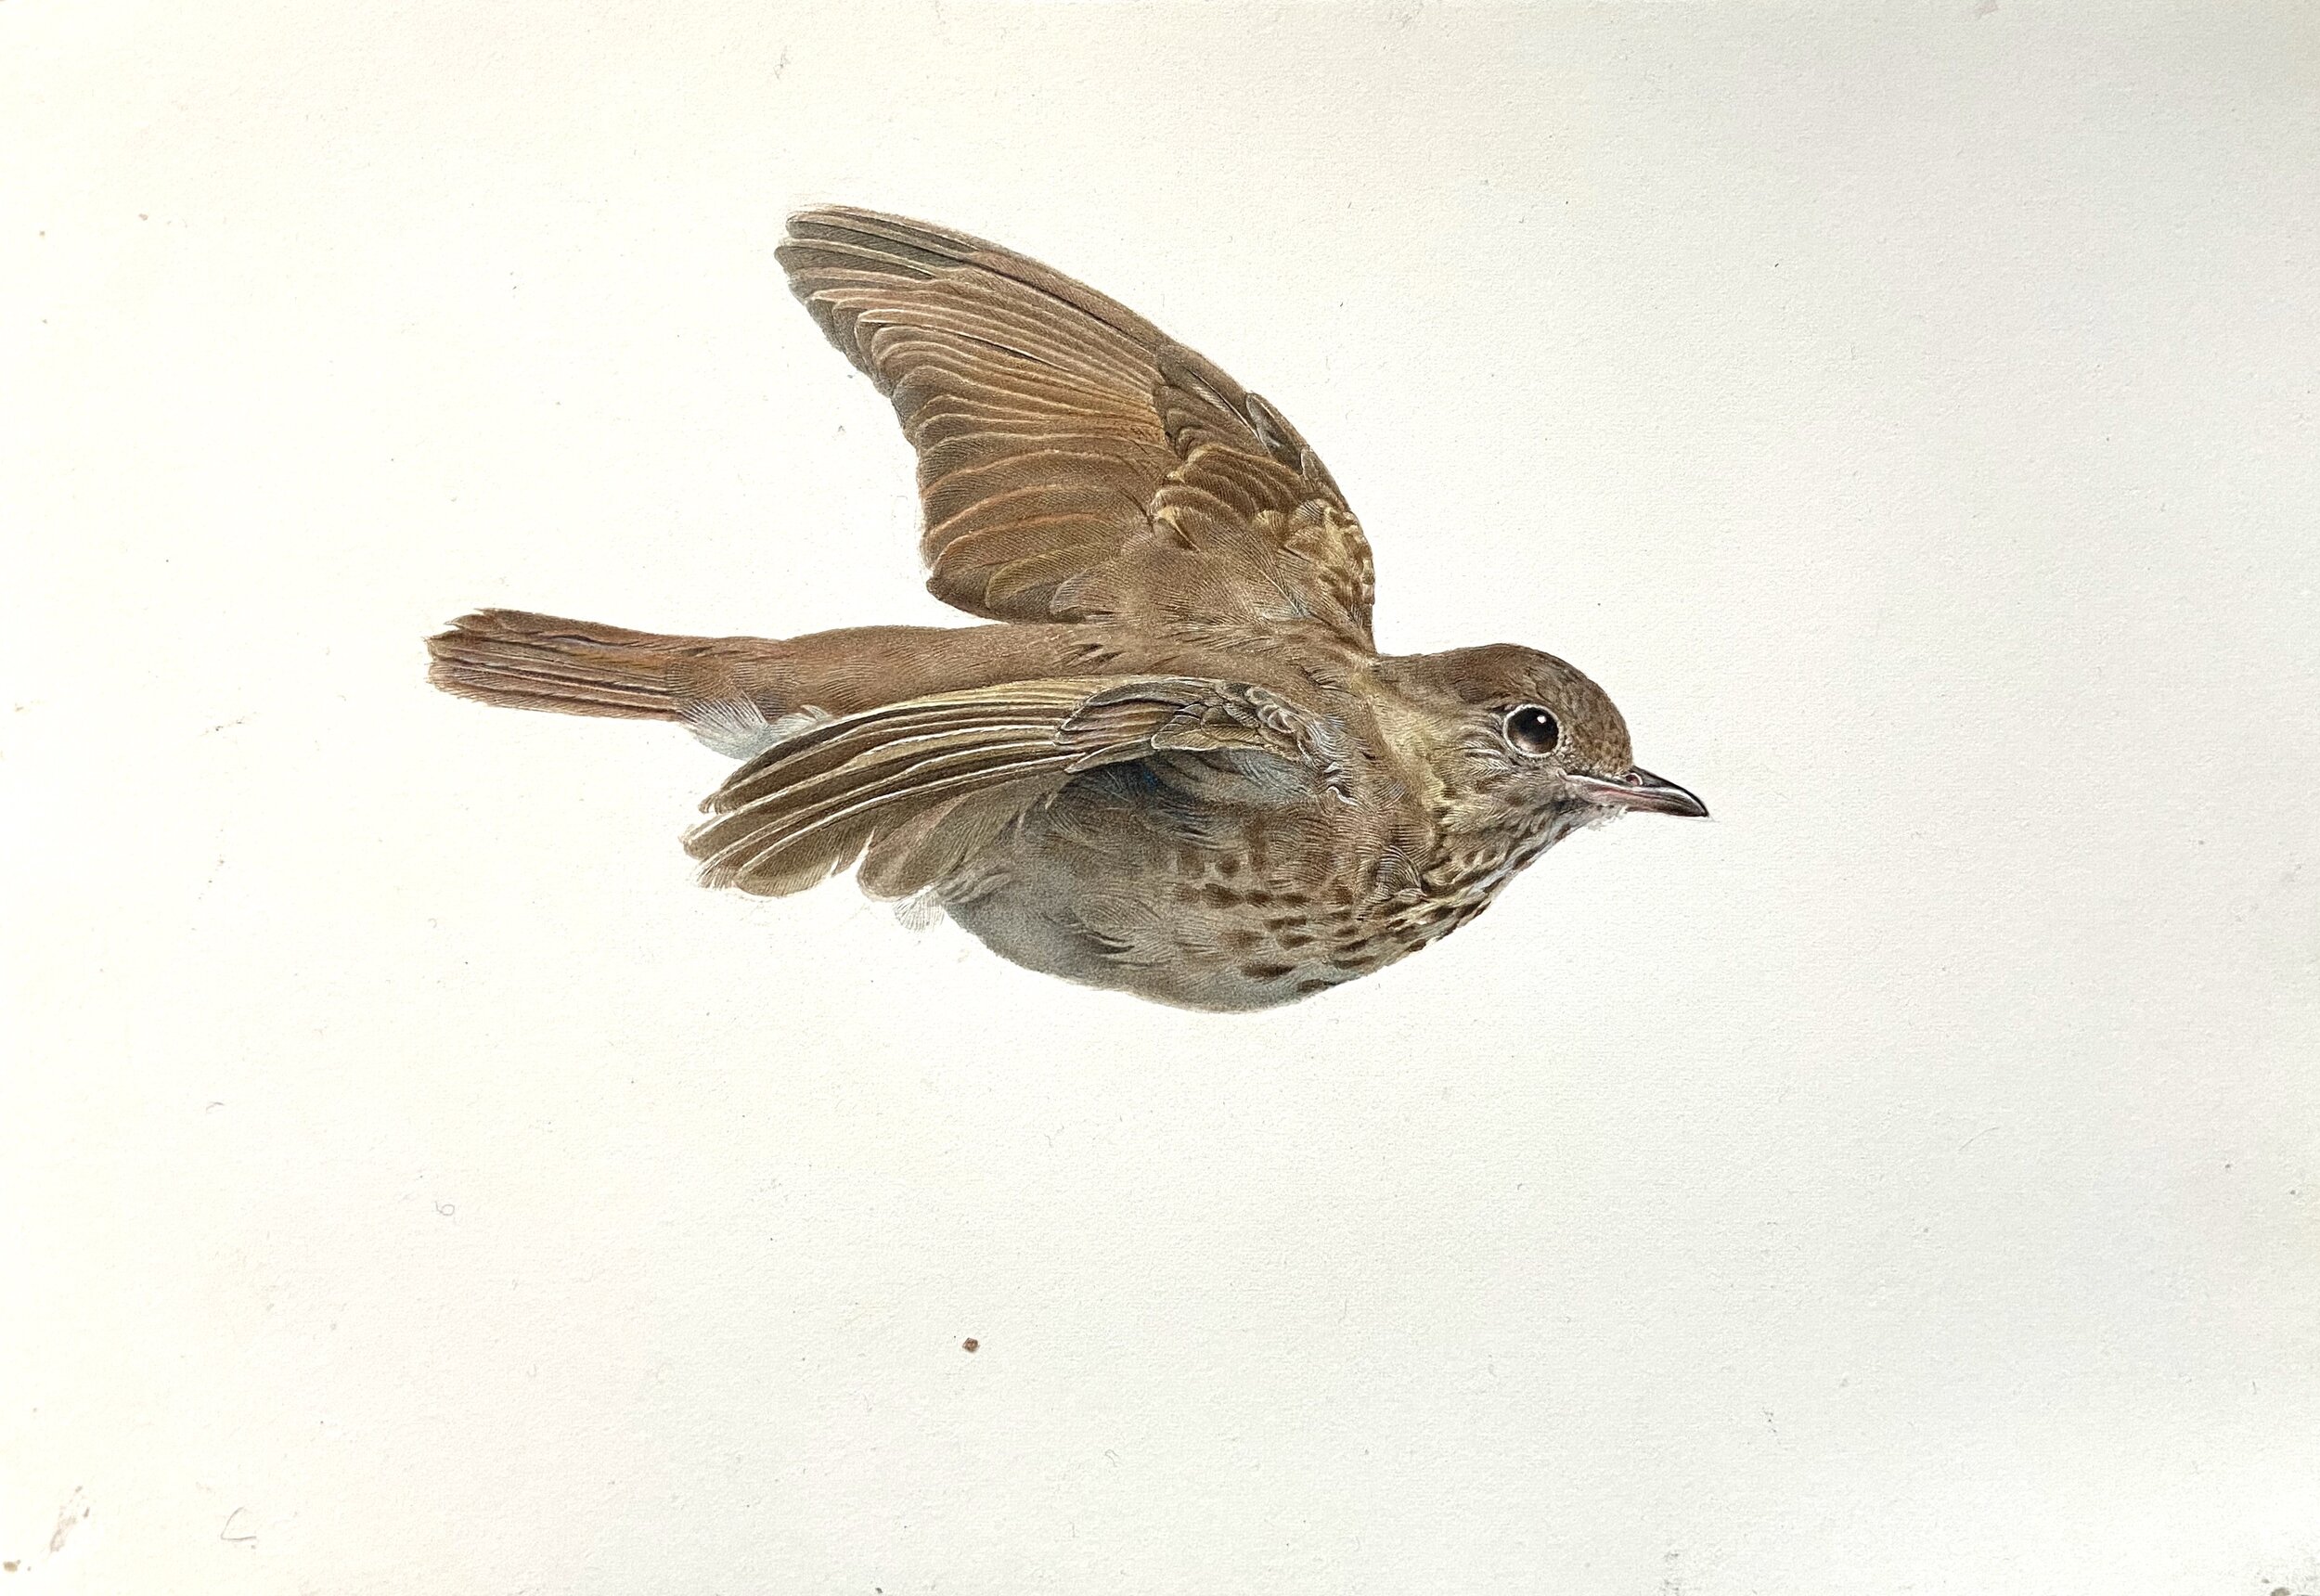  Kevin King  Study of a Thrush,  2020 Watercolor on paper 7 x 10 inches 